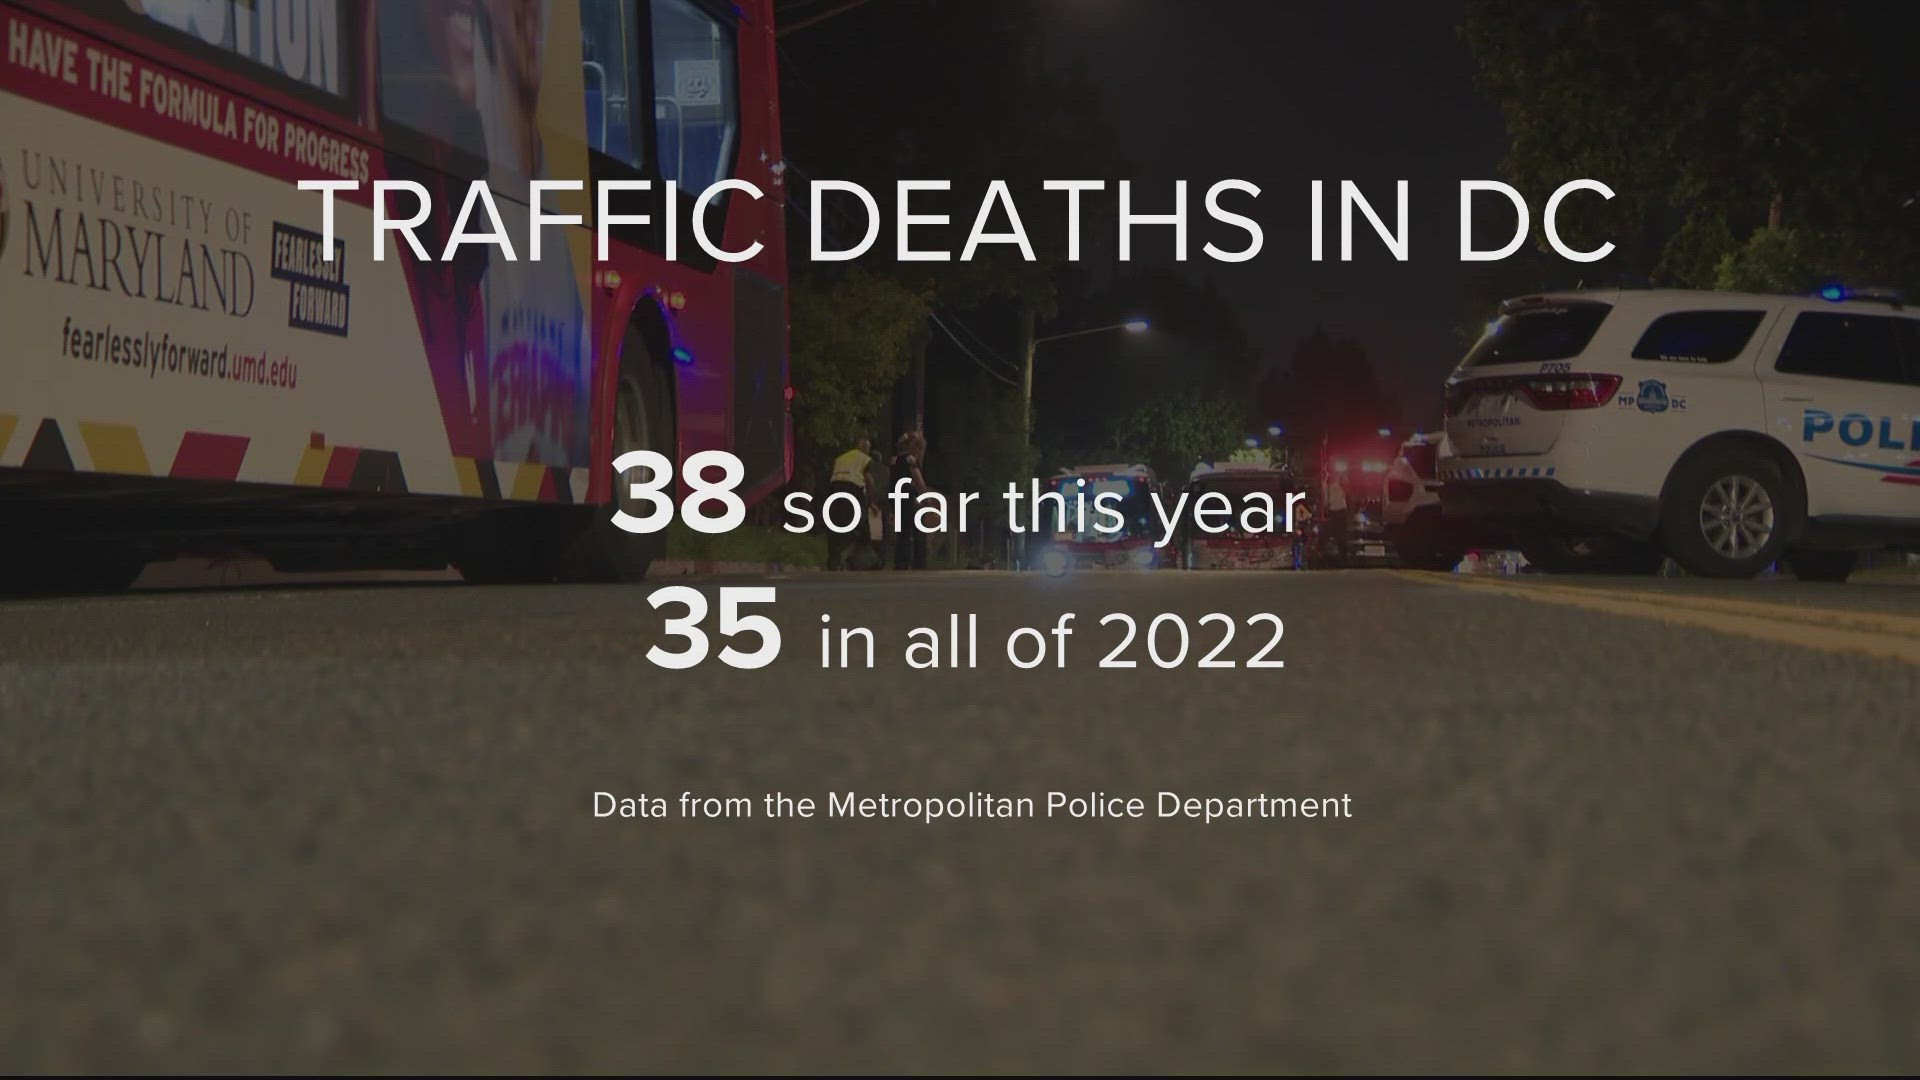 DC leaders are trying to make streets safer for all of us. They're talking about traffic safety laws that were proposed after the March crash on Rock Creek Park.